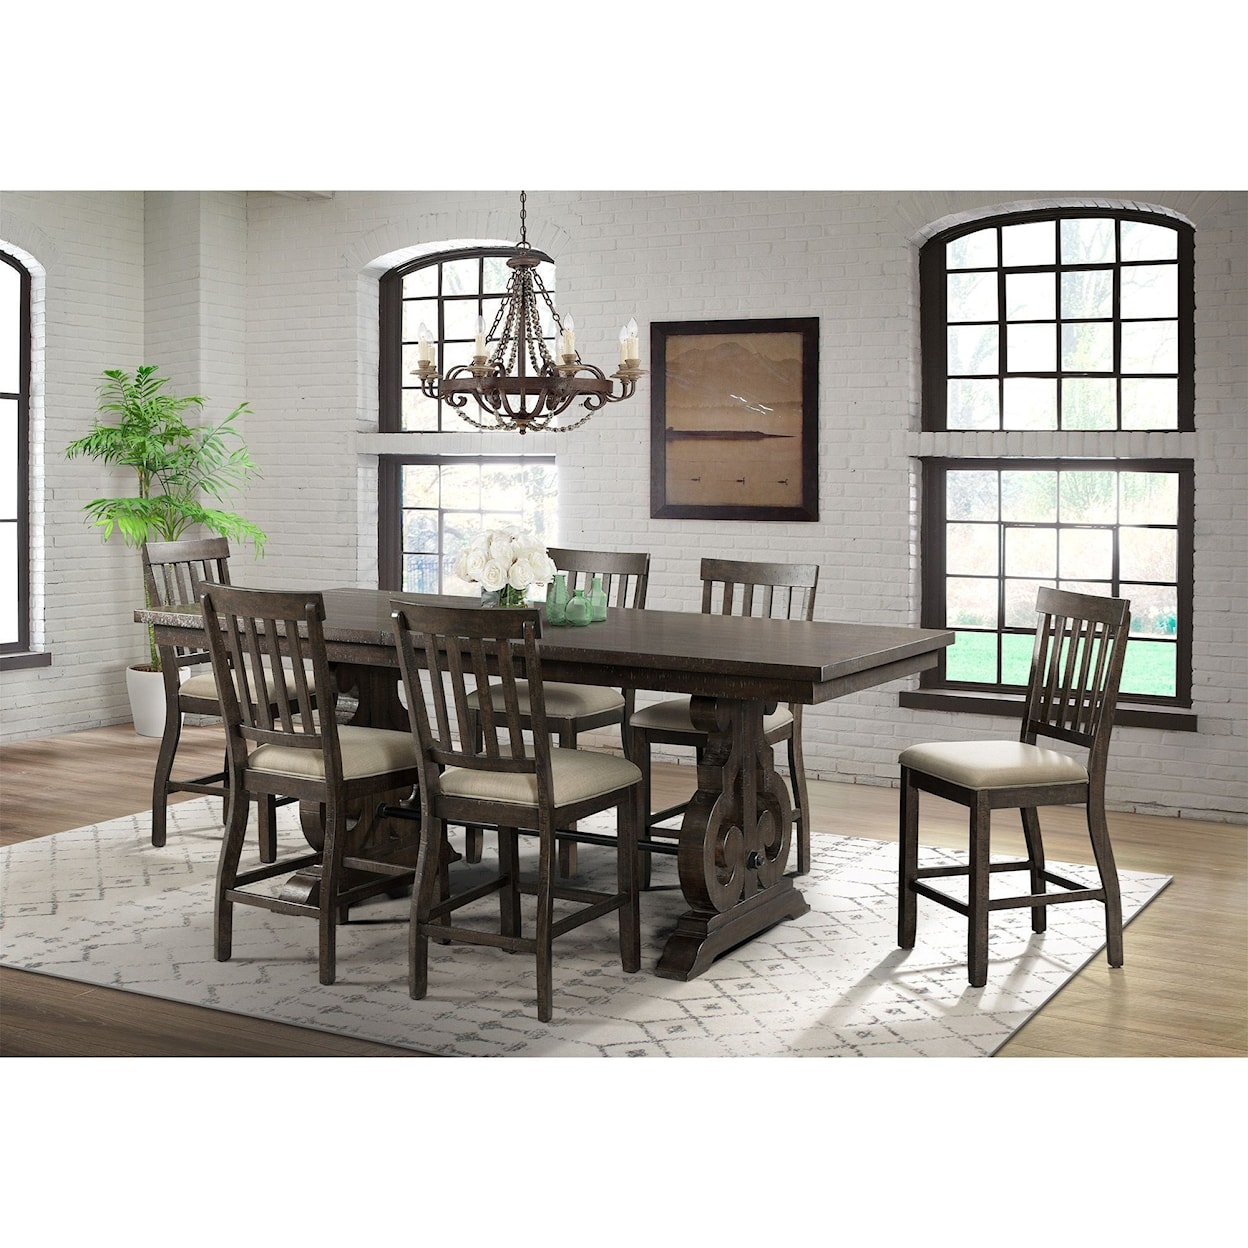 Elements International Stone 7-Piece Counter Height Dining Set